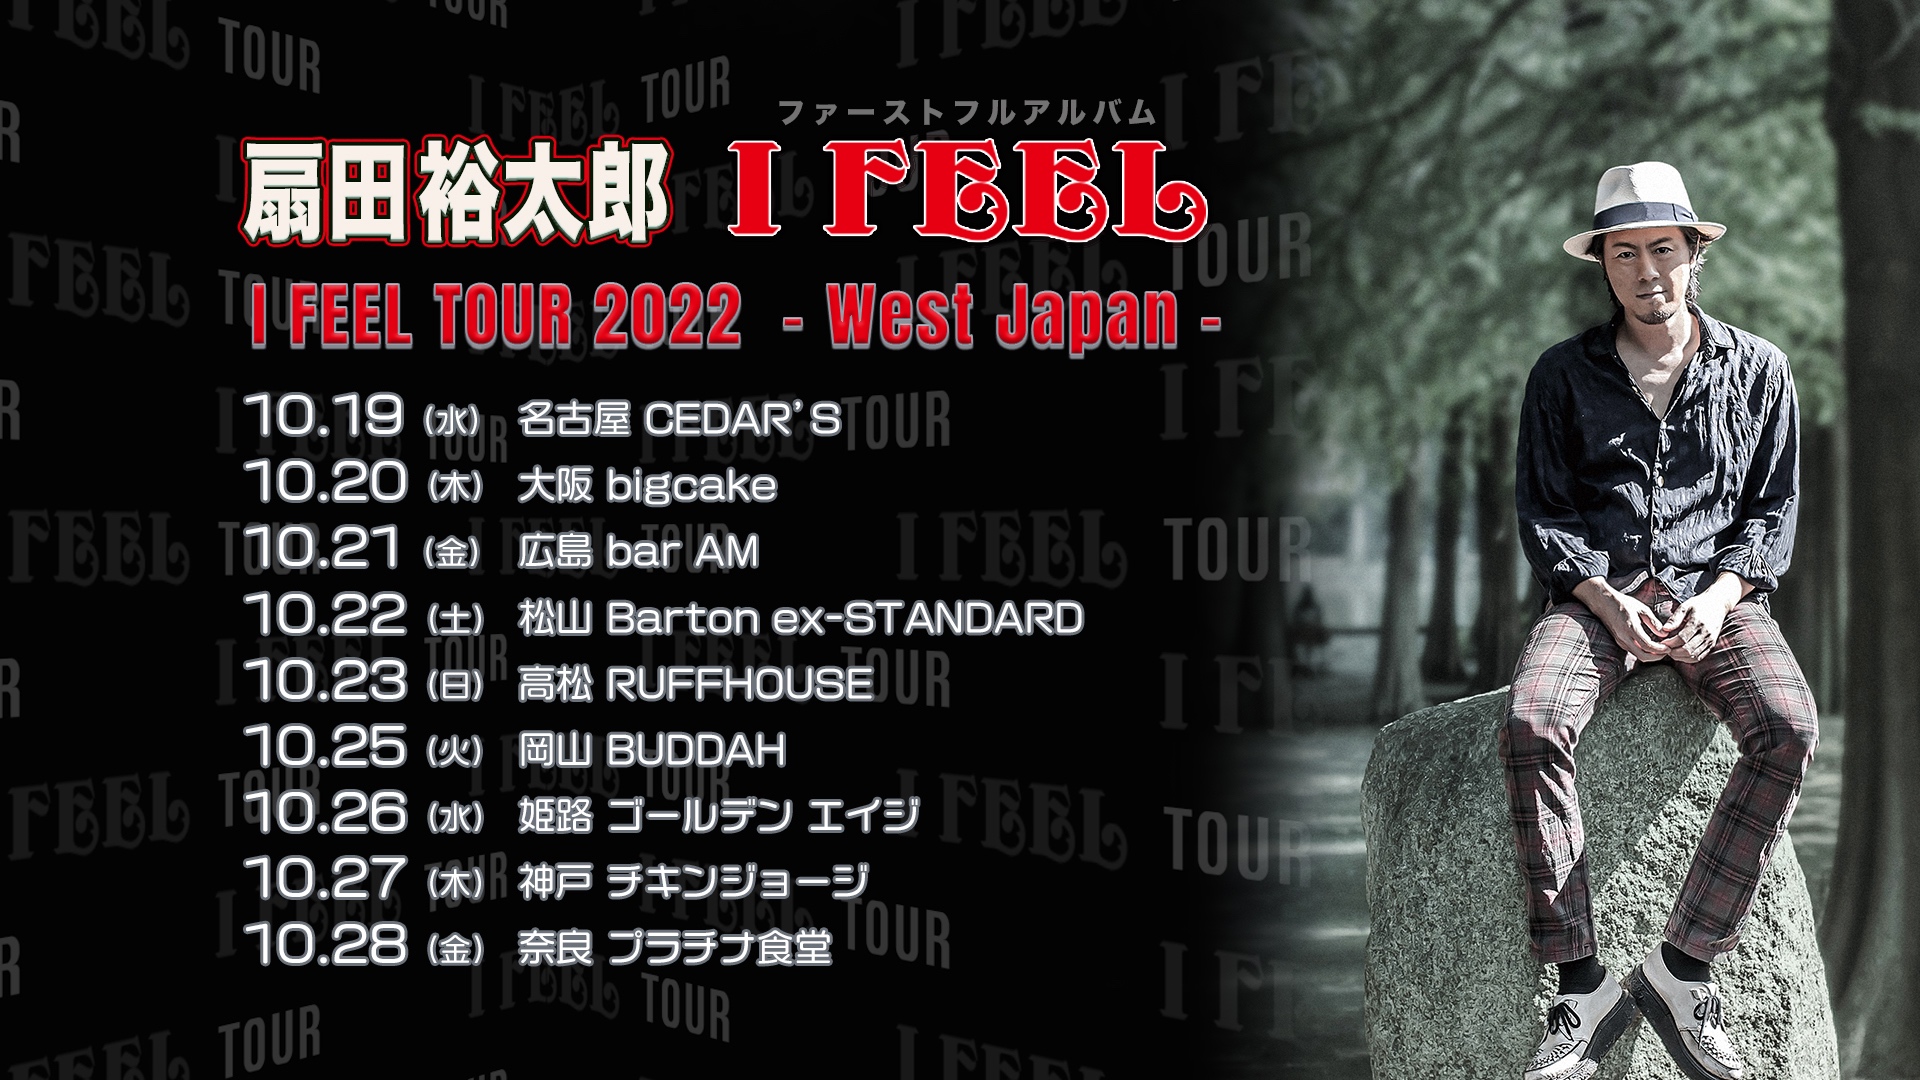 10/27(thu)  I FEEL TOUR 2022 -West Japan-【神戸 チキンジョージからLIVE配信】